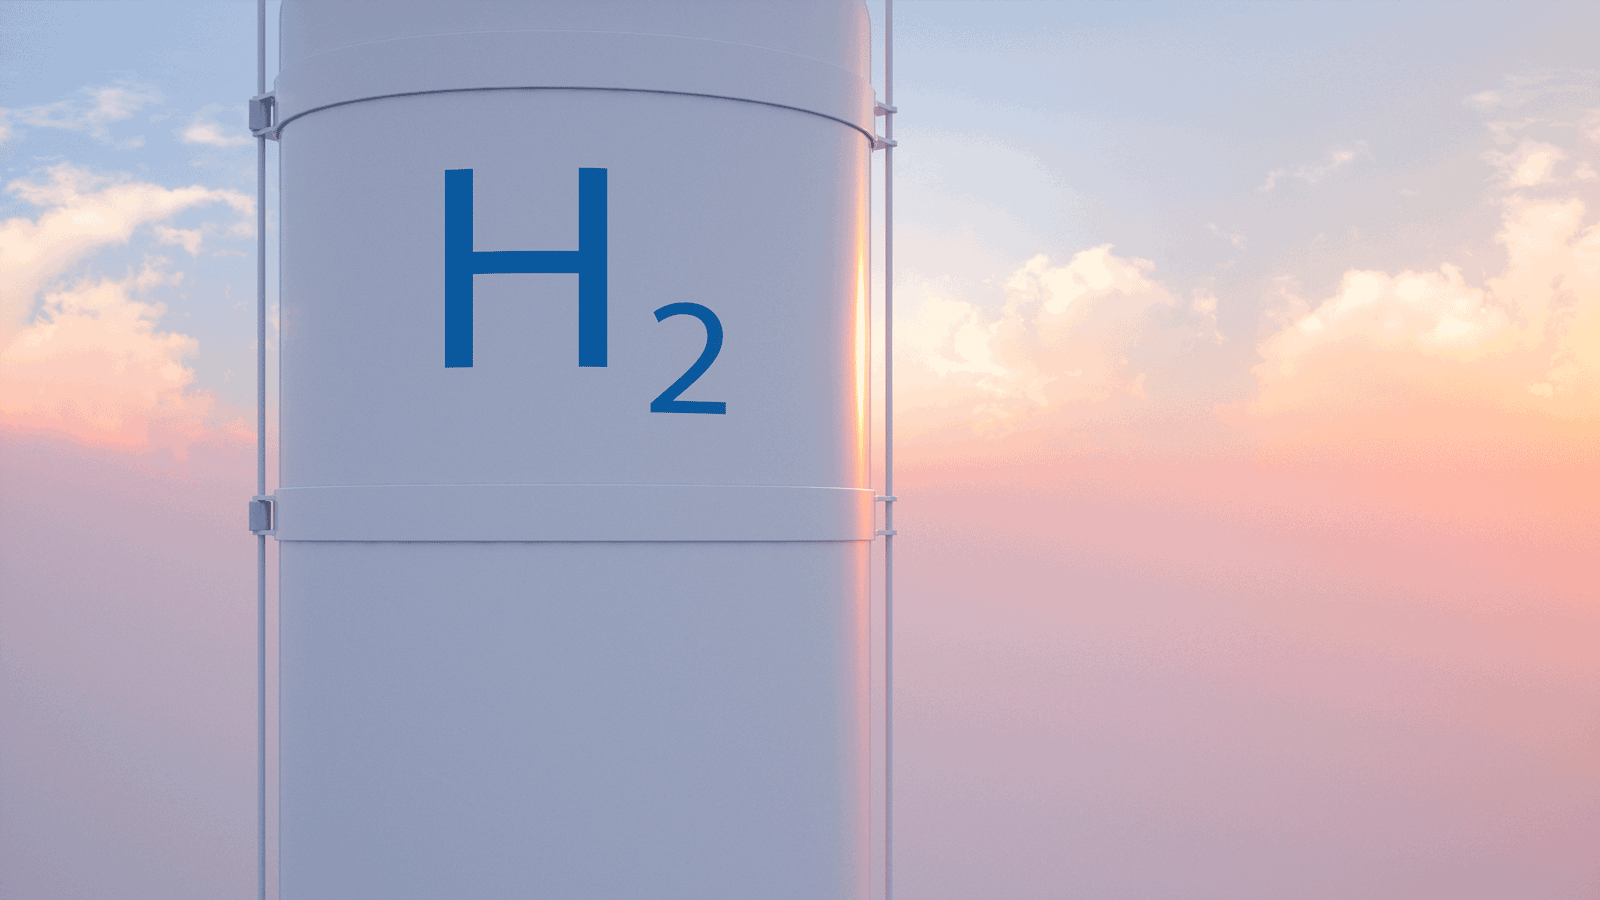 Green Energy Park secures $30m to build 10.8GW hydrogen production plant in Brazil